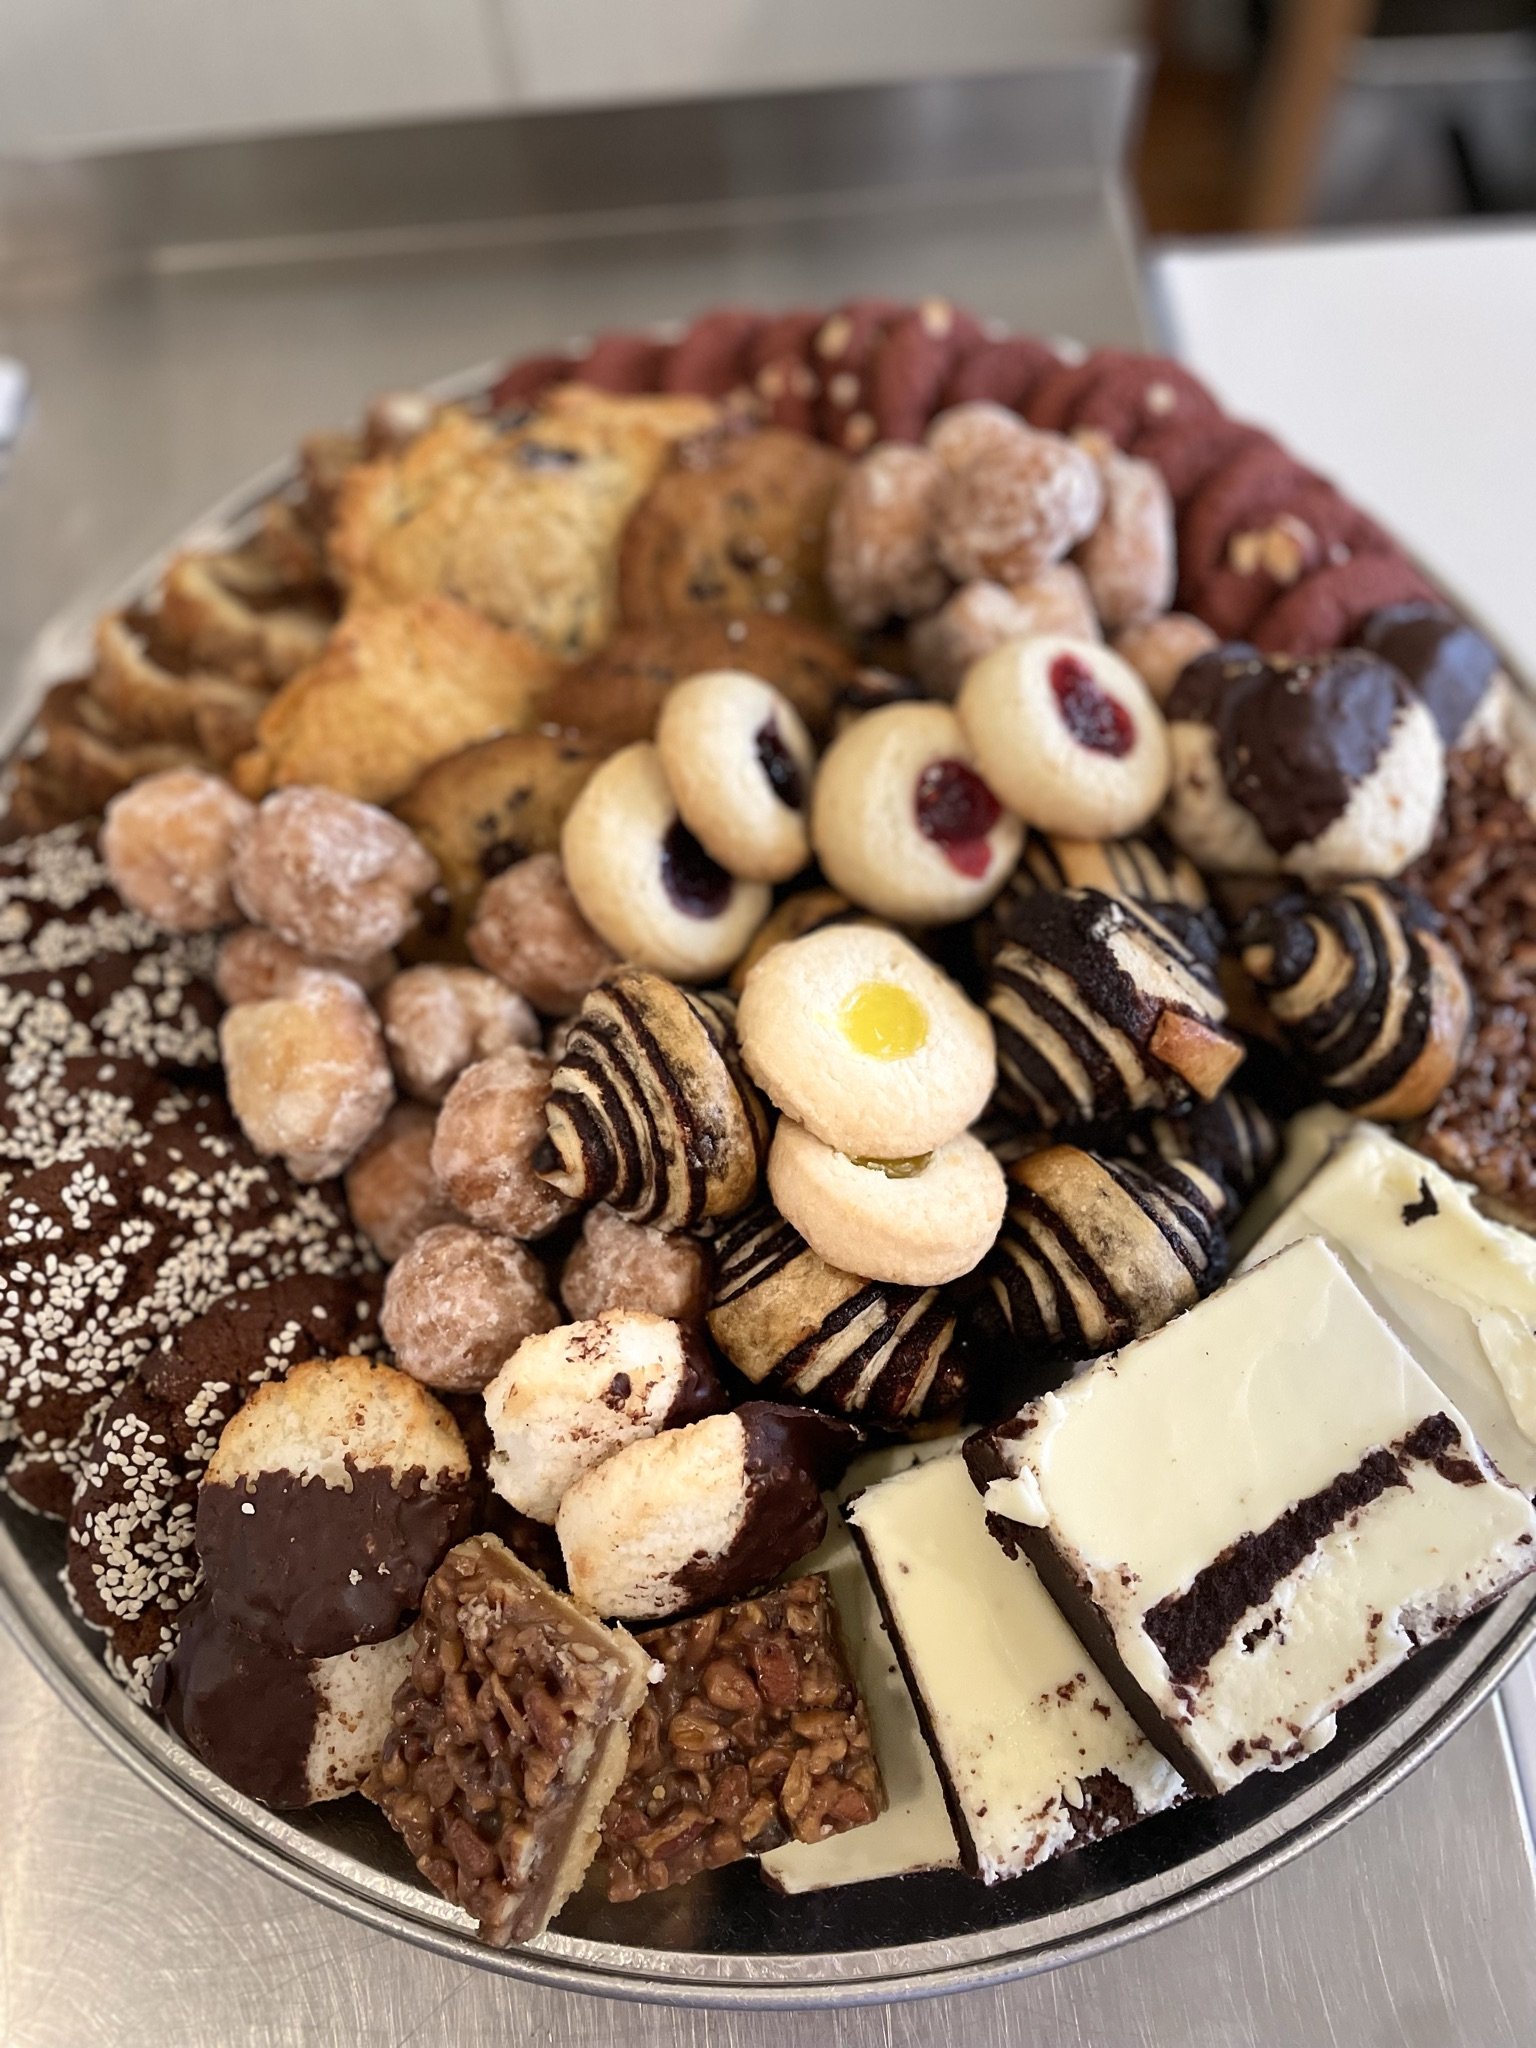 Pastries/Cookie Tray